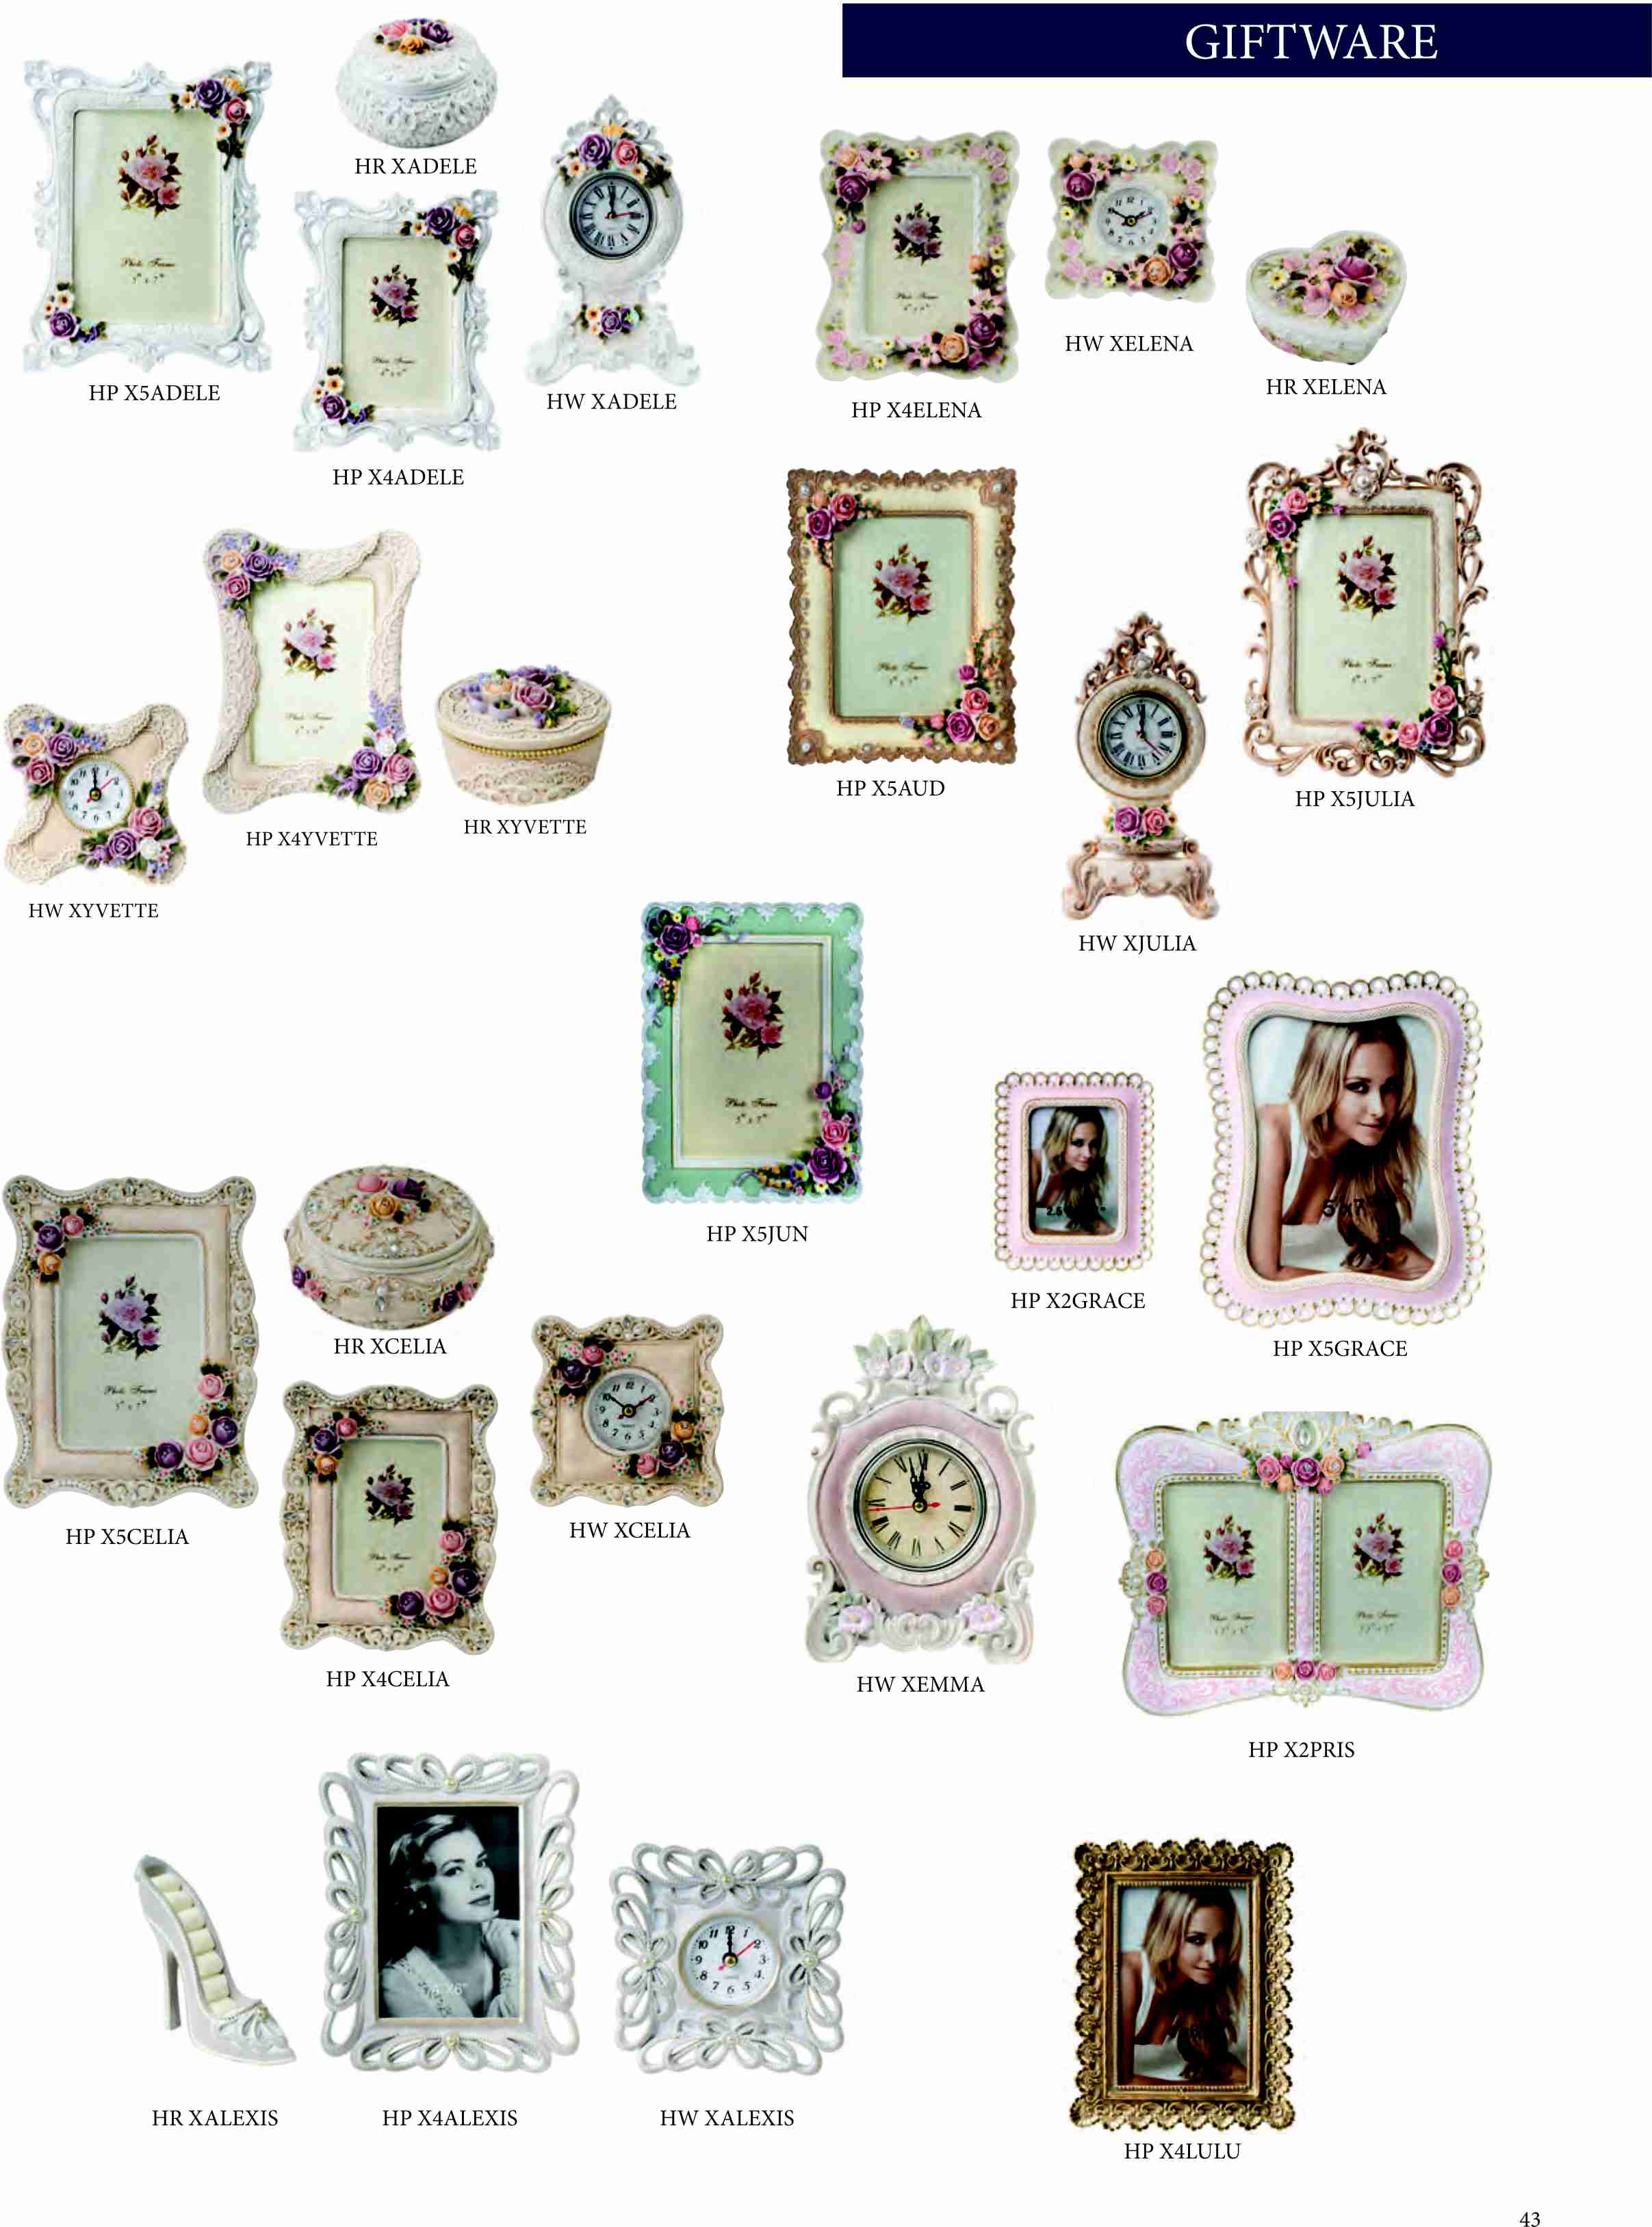 Giftware